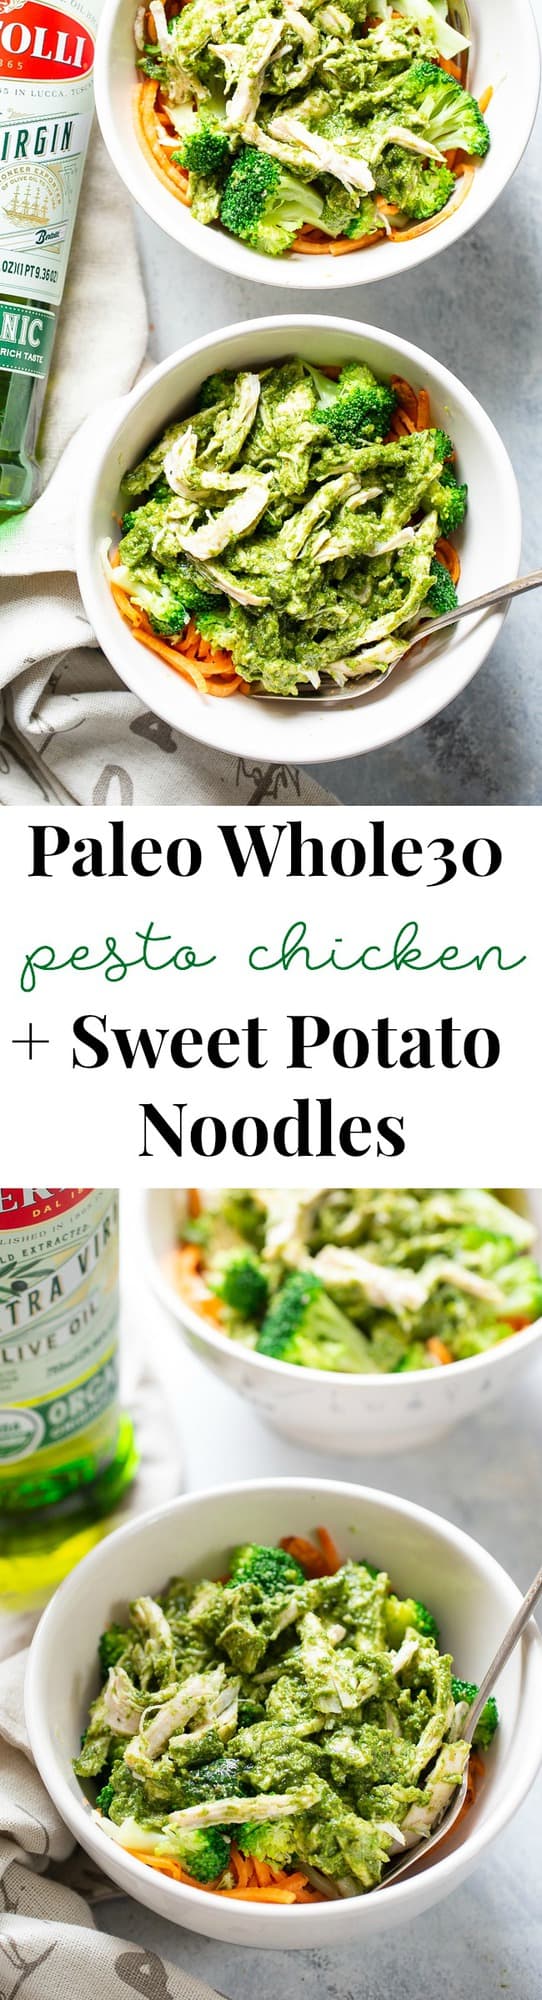 [This paleo and Whole30 pesto chicken with broccoli and sweet potato noodles is packed with flavor and super simple to prepare.  It’s perfect for weeknight dinners and date nights alike!  An easy and fun paleo dinner!] #Bertolli #TheRecipeIsSimple #evoo #QualityOliveOil and #ad